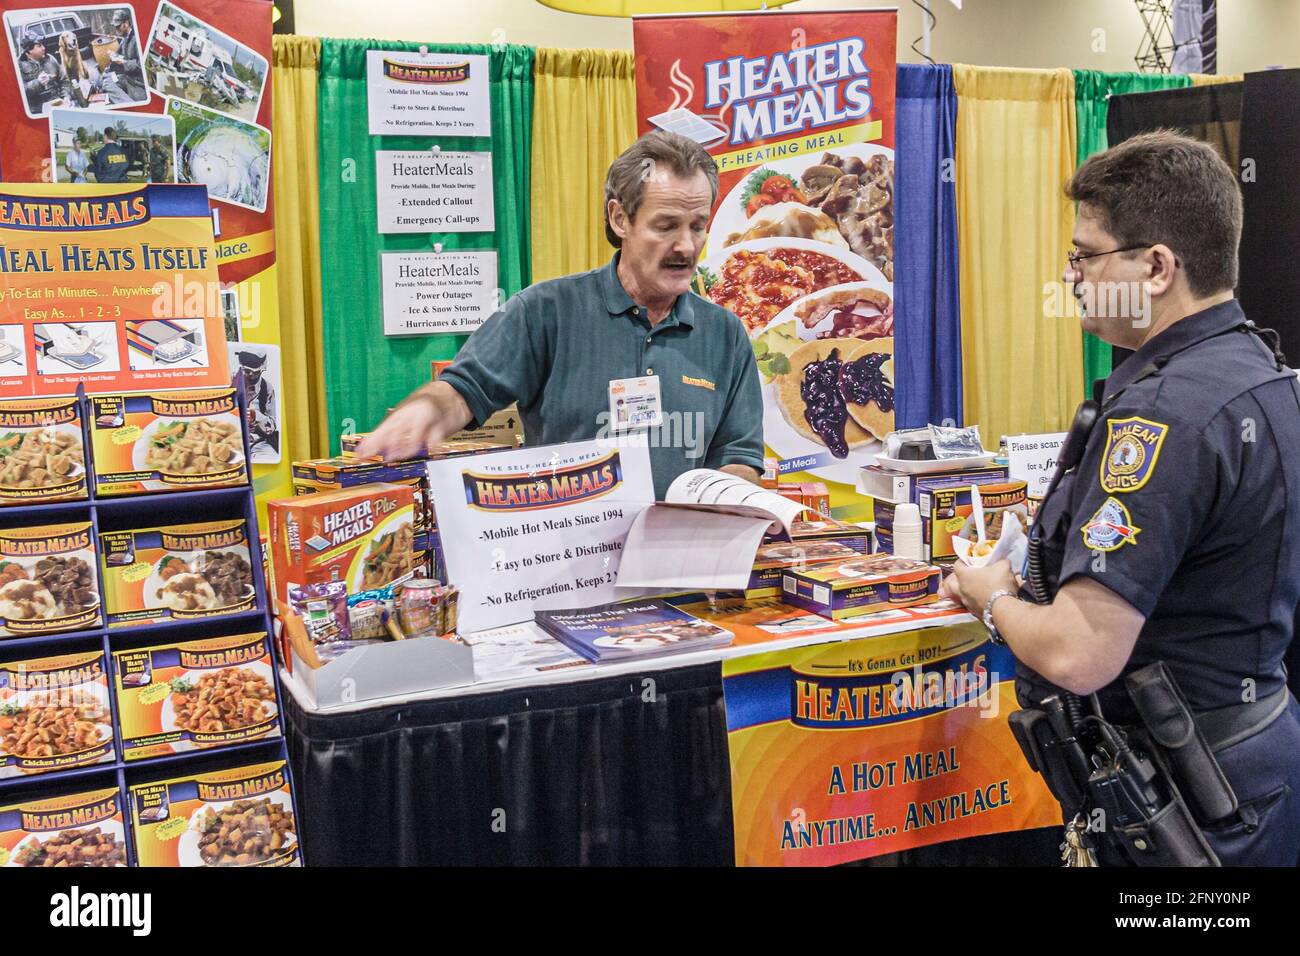 Florida,Miami Beach Convention Center,centre,IACP International Association of Chiefs of Police annual conference,Heater meals self heating exhibit ex Stock Photo